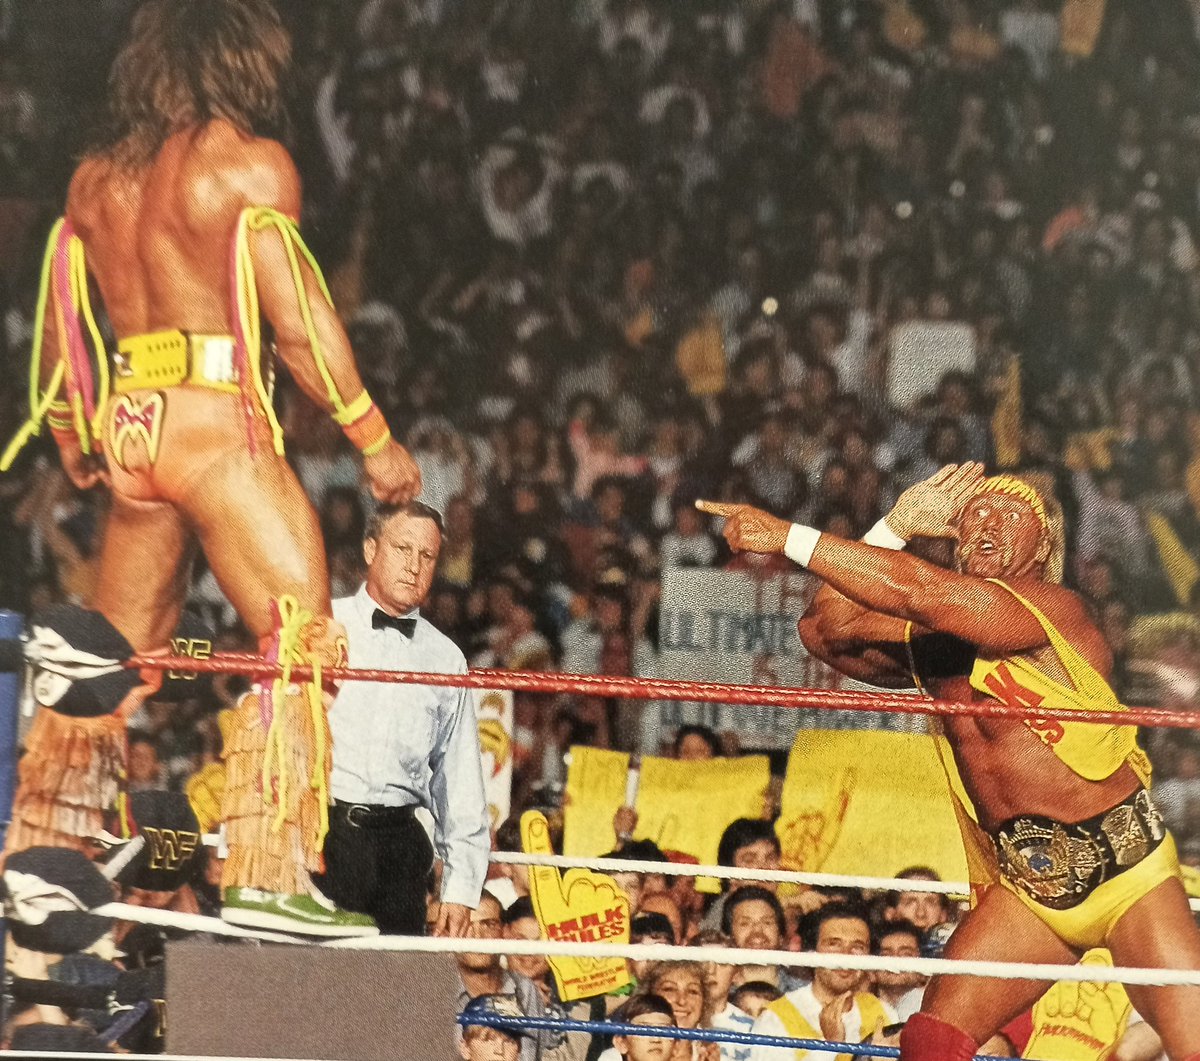 Rasslin' History 101 Twitter: "This truly was "The Ultimate Challenge",in every sense of that term:WWF World Heavyweight Champion Hulk Hogan vs WWF Intercontinental Champion The Ultimate Warrior at WrestleMania VI. https://t.co/OGoYkEVYIn" /